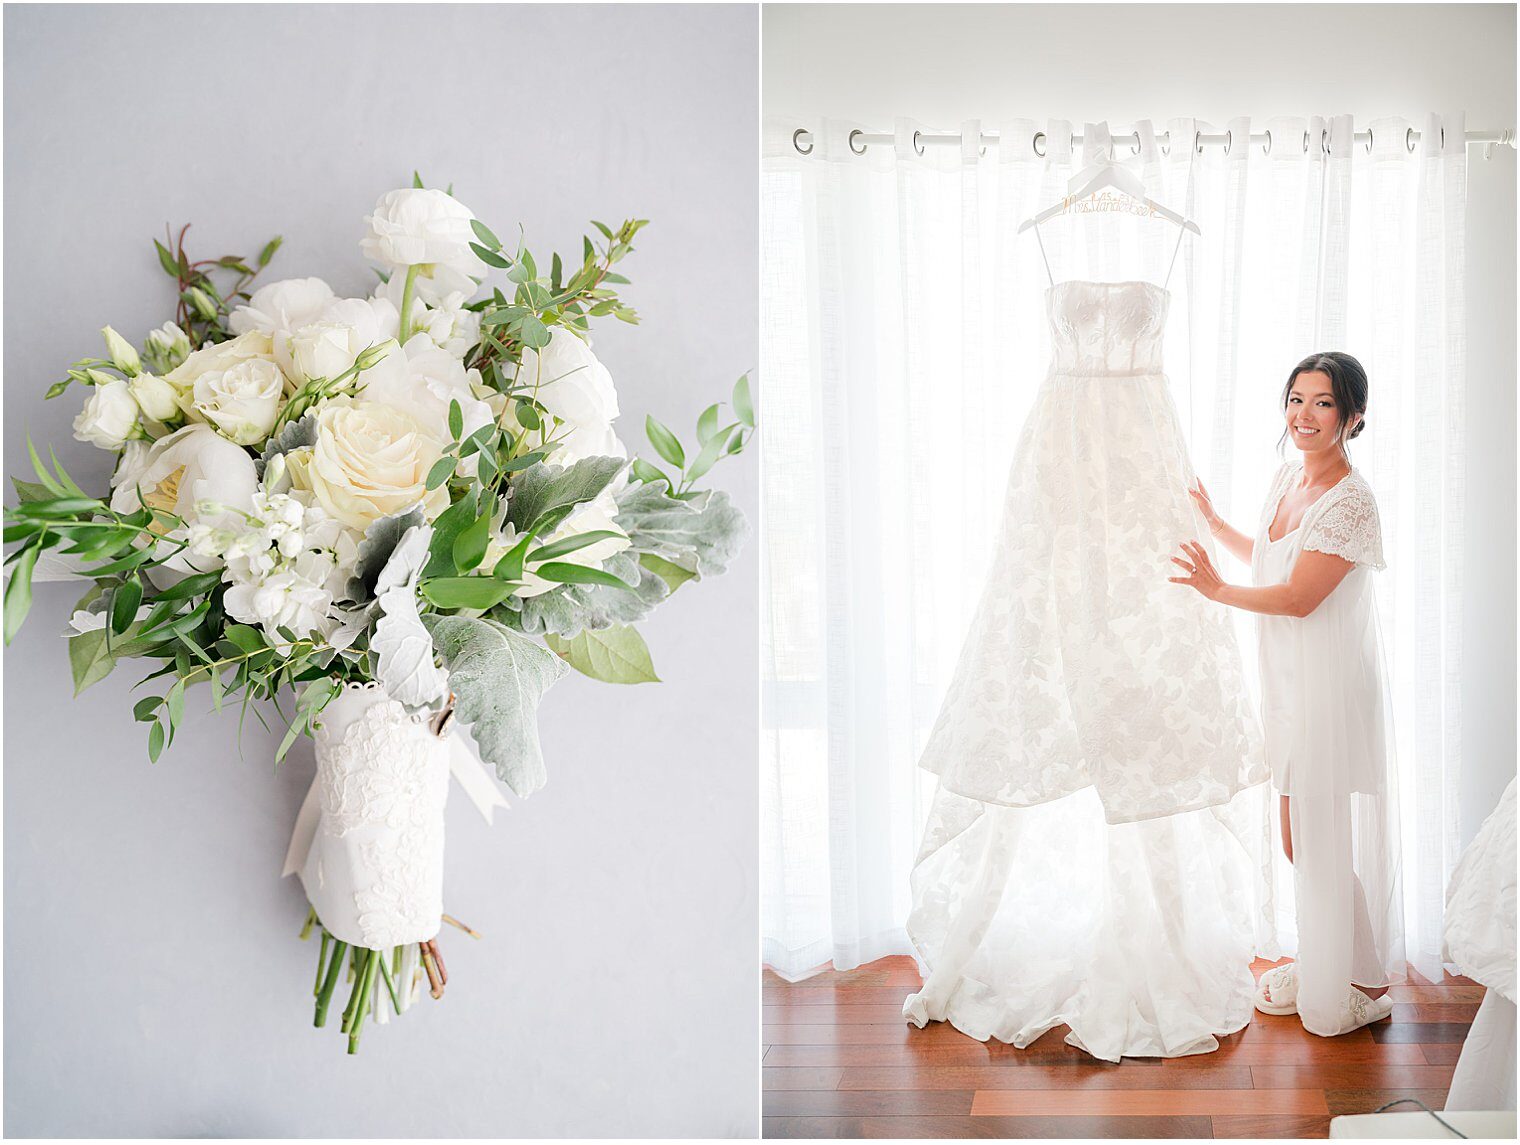 Details of the wedding dress and bouquet 